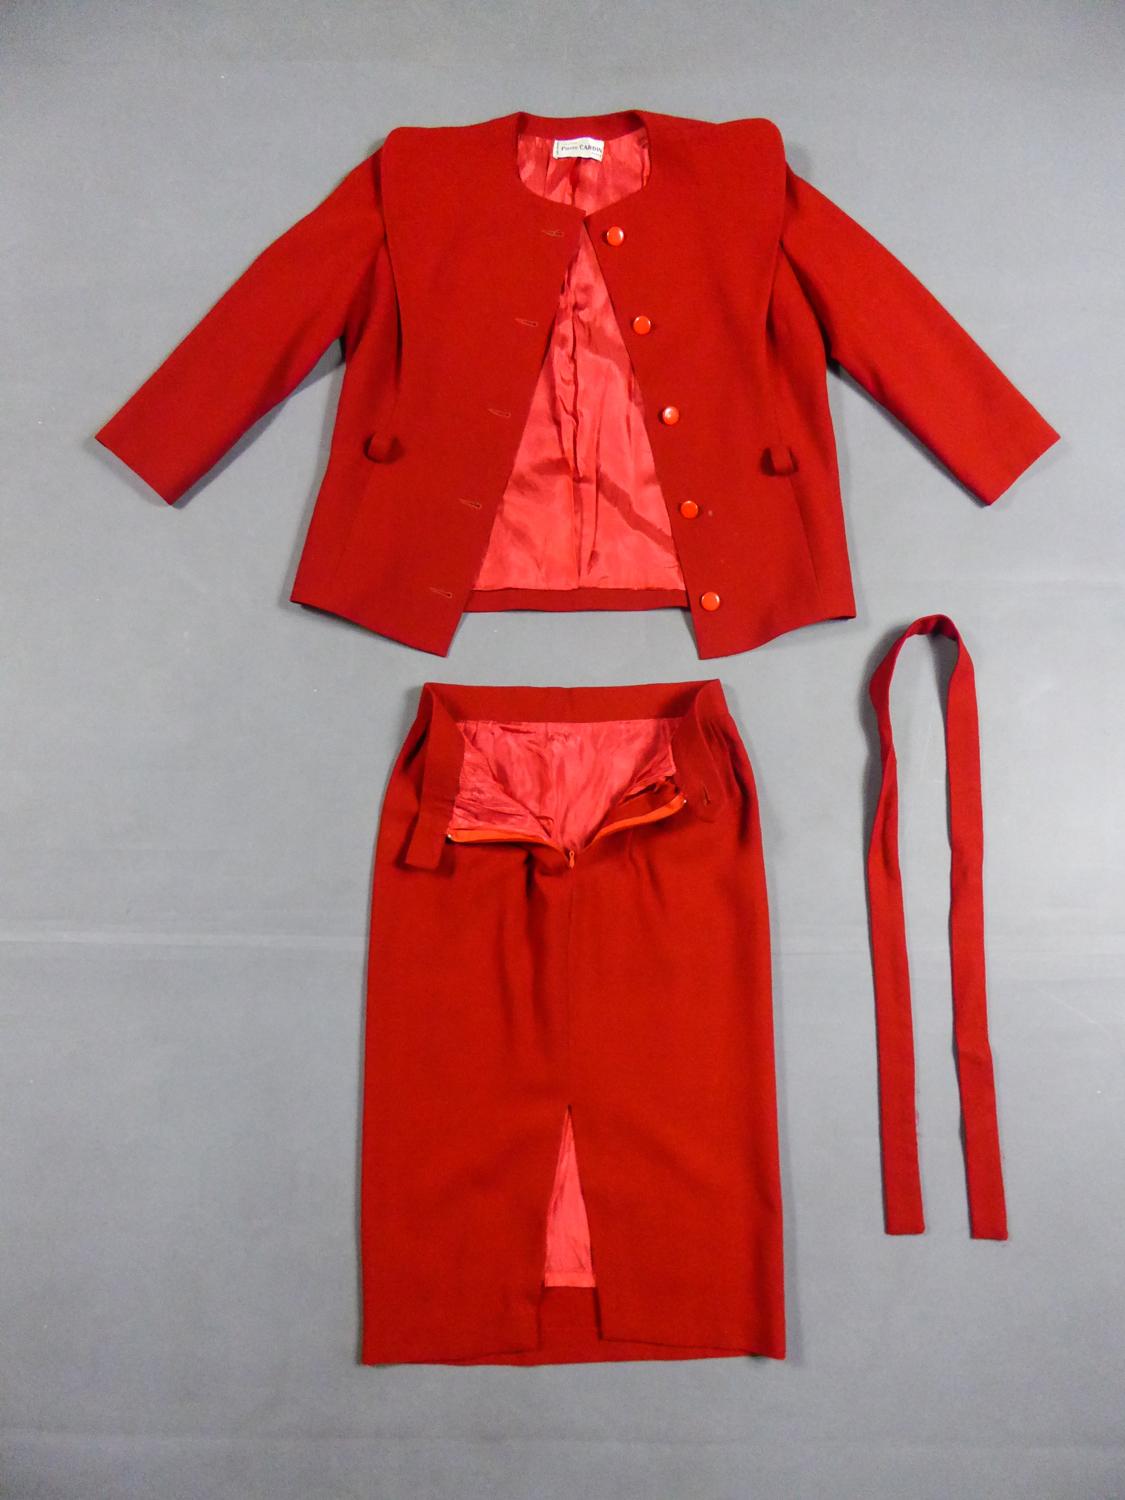 Circa 1980
France

Astonishing skirt suit in vermilion red wool, designed by Pierre Cardin from the 1980s. Jacket with long sleeves and plastron with integrated oversized false collar, marking a slender triangle shape marking the shoulders. Waist